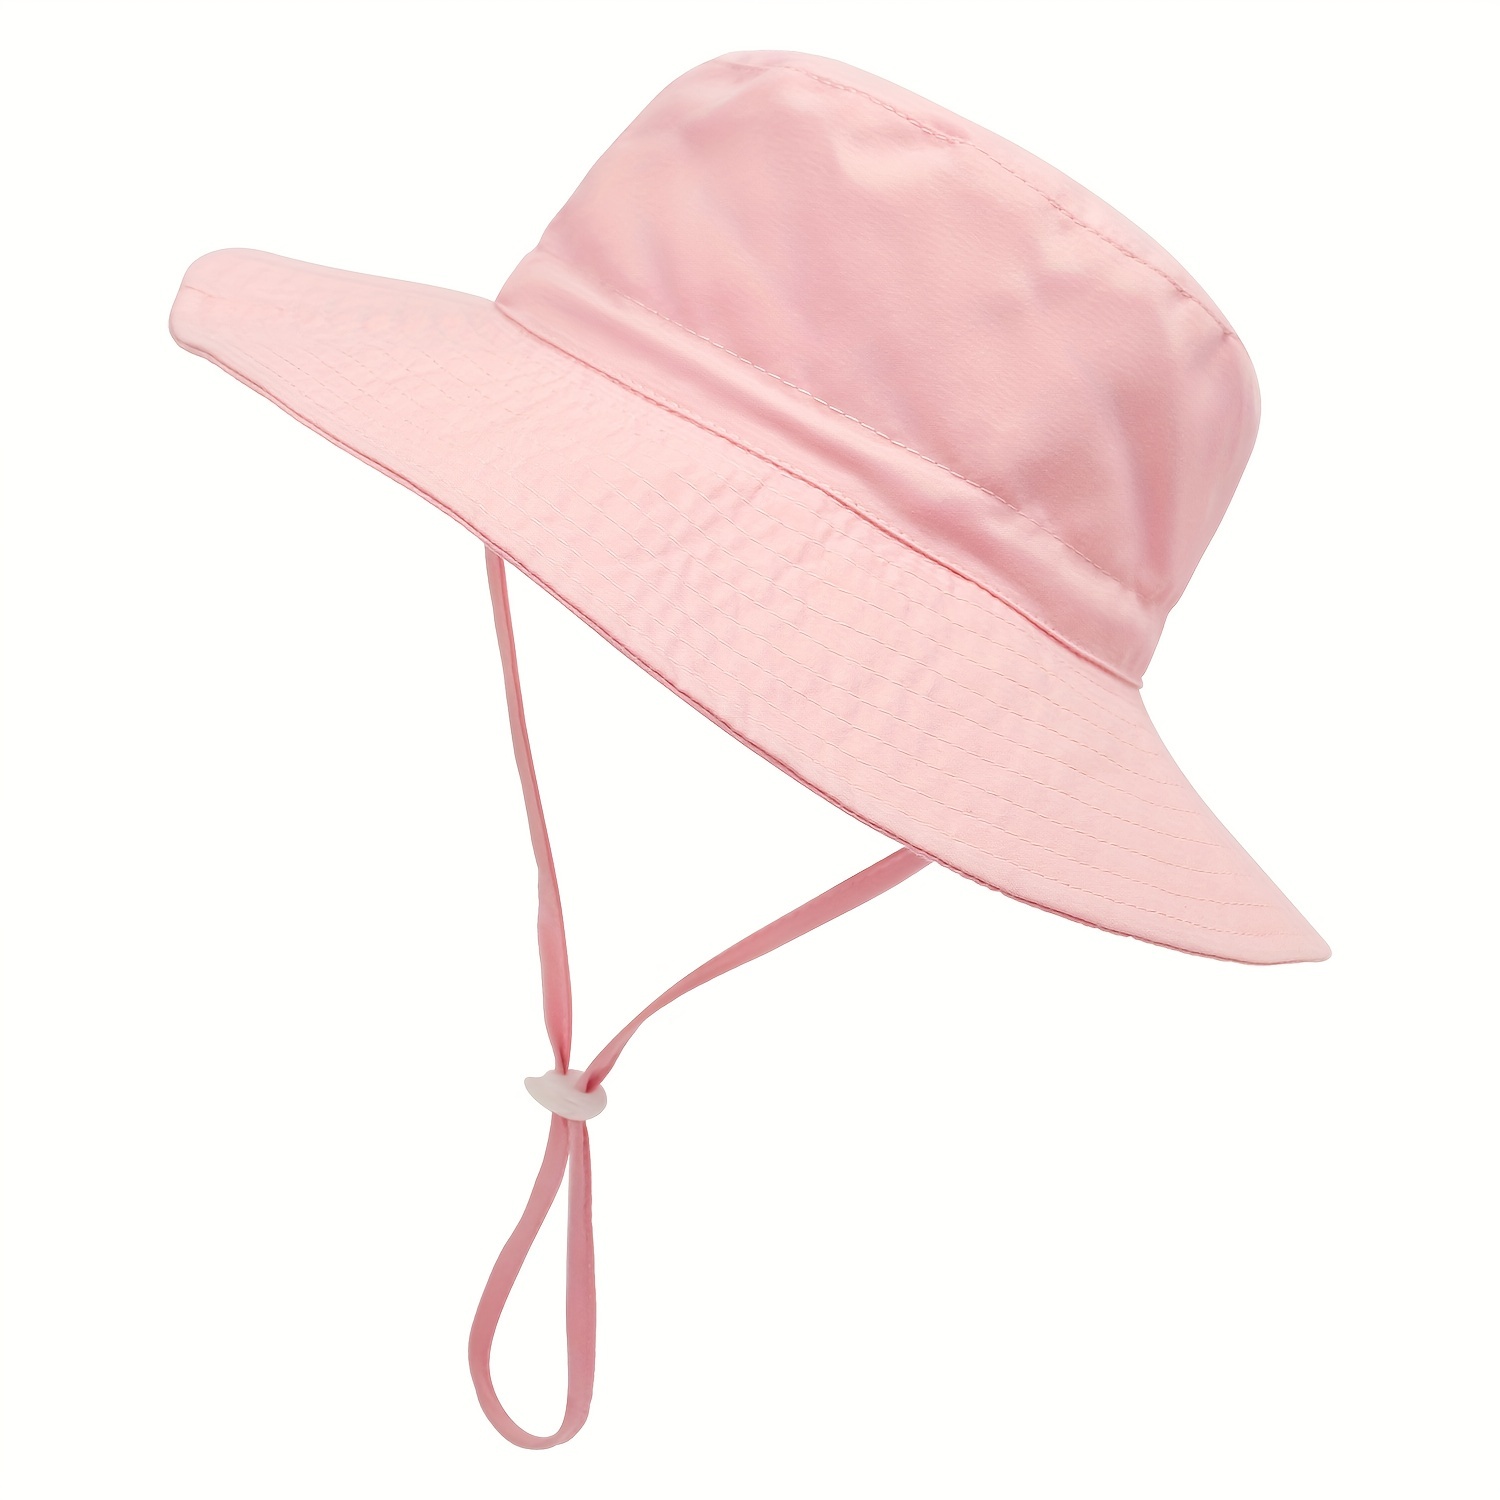 Cute Casual Fisherman's Hat, Breathable Drawstrings Wide Brim Sun Protection Bucket Hat for Outdoor Traveling Beach Party Boys and Girls